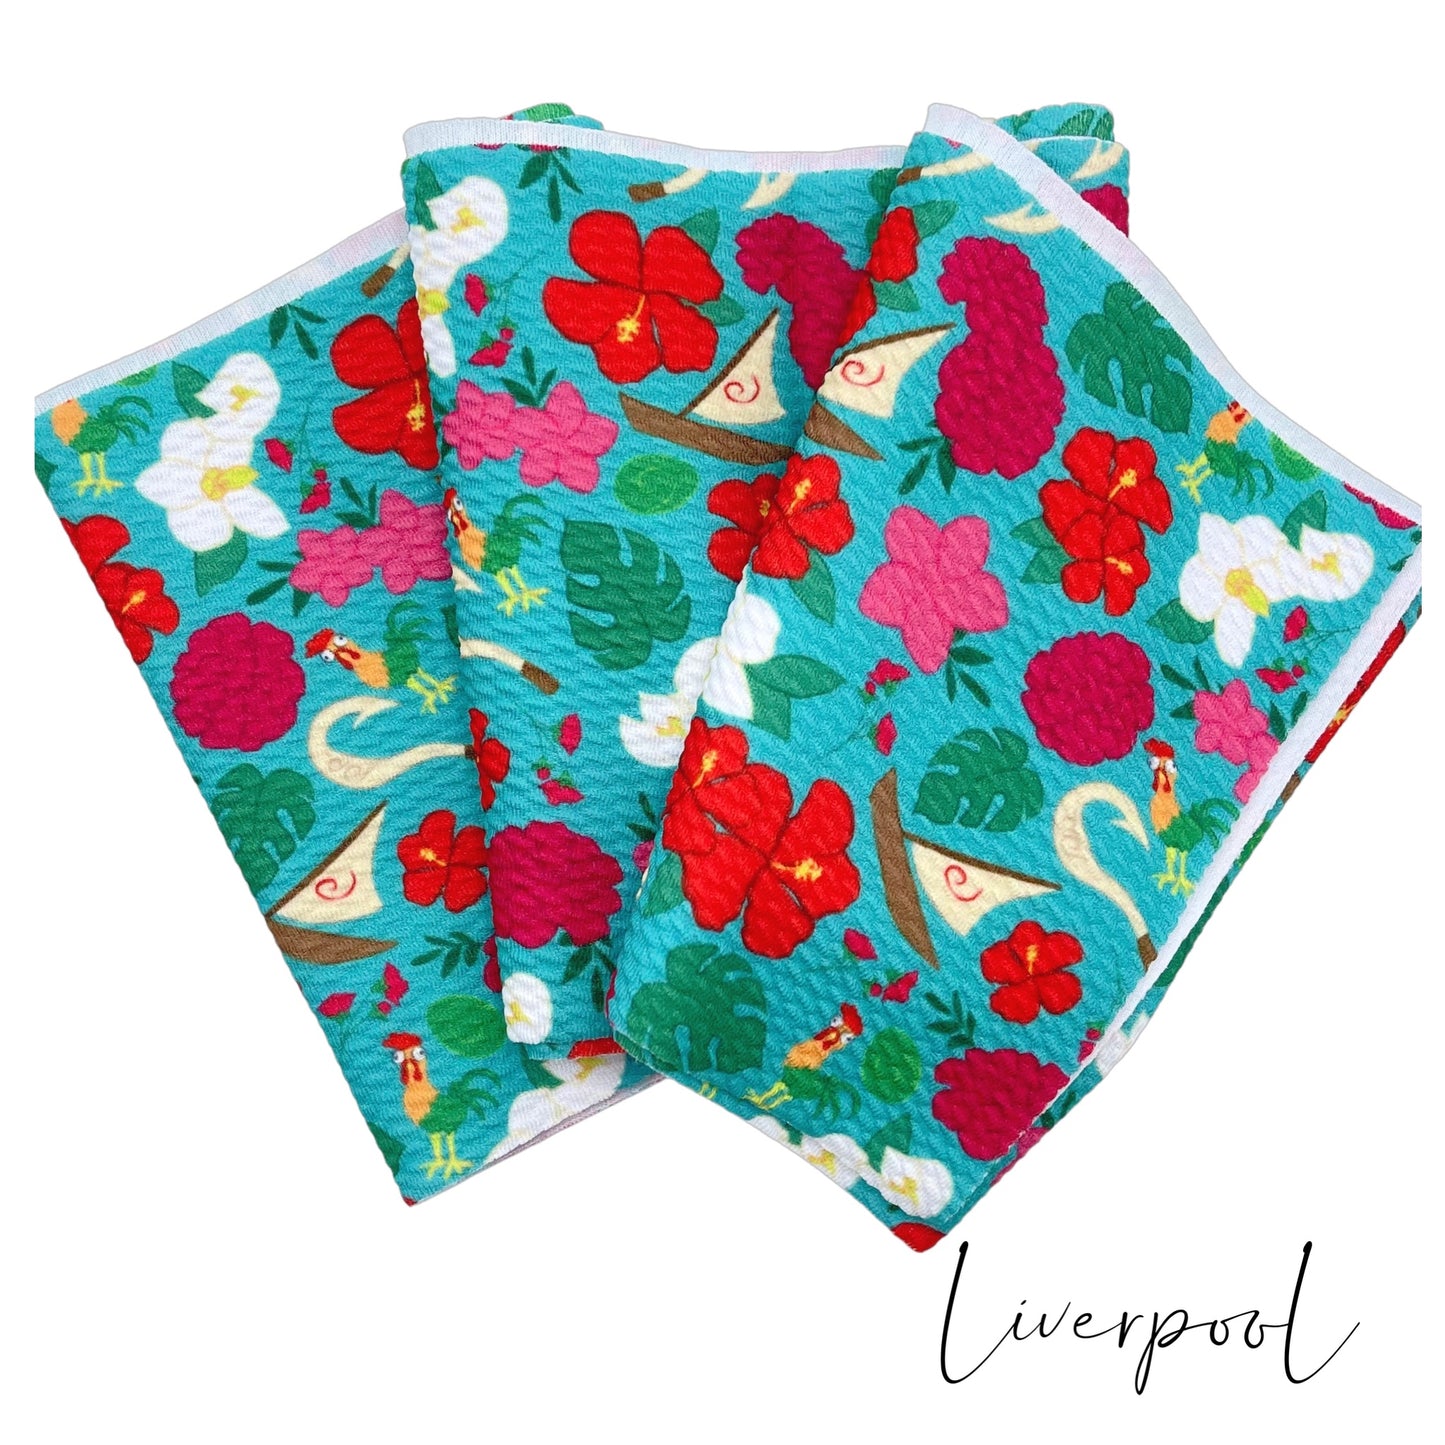 Folded aqua Liverpool stretch fabric strip with pink, fuchsia, red and white floral princess pattern including sail boat, hook, and chickens.